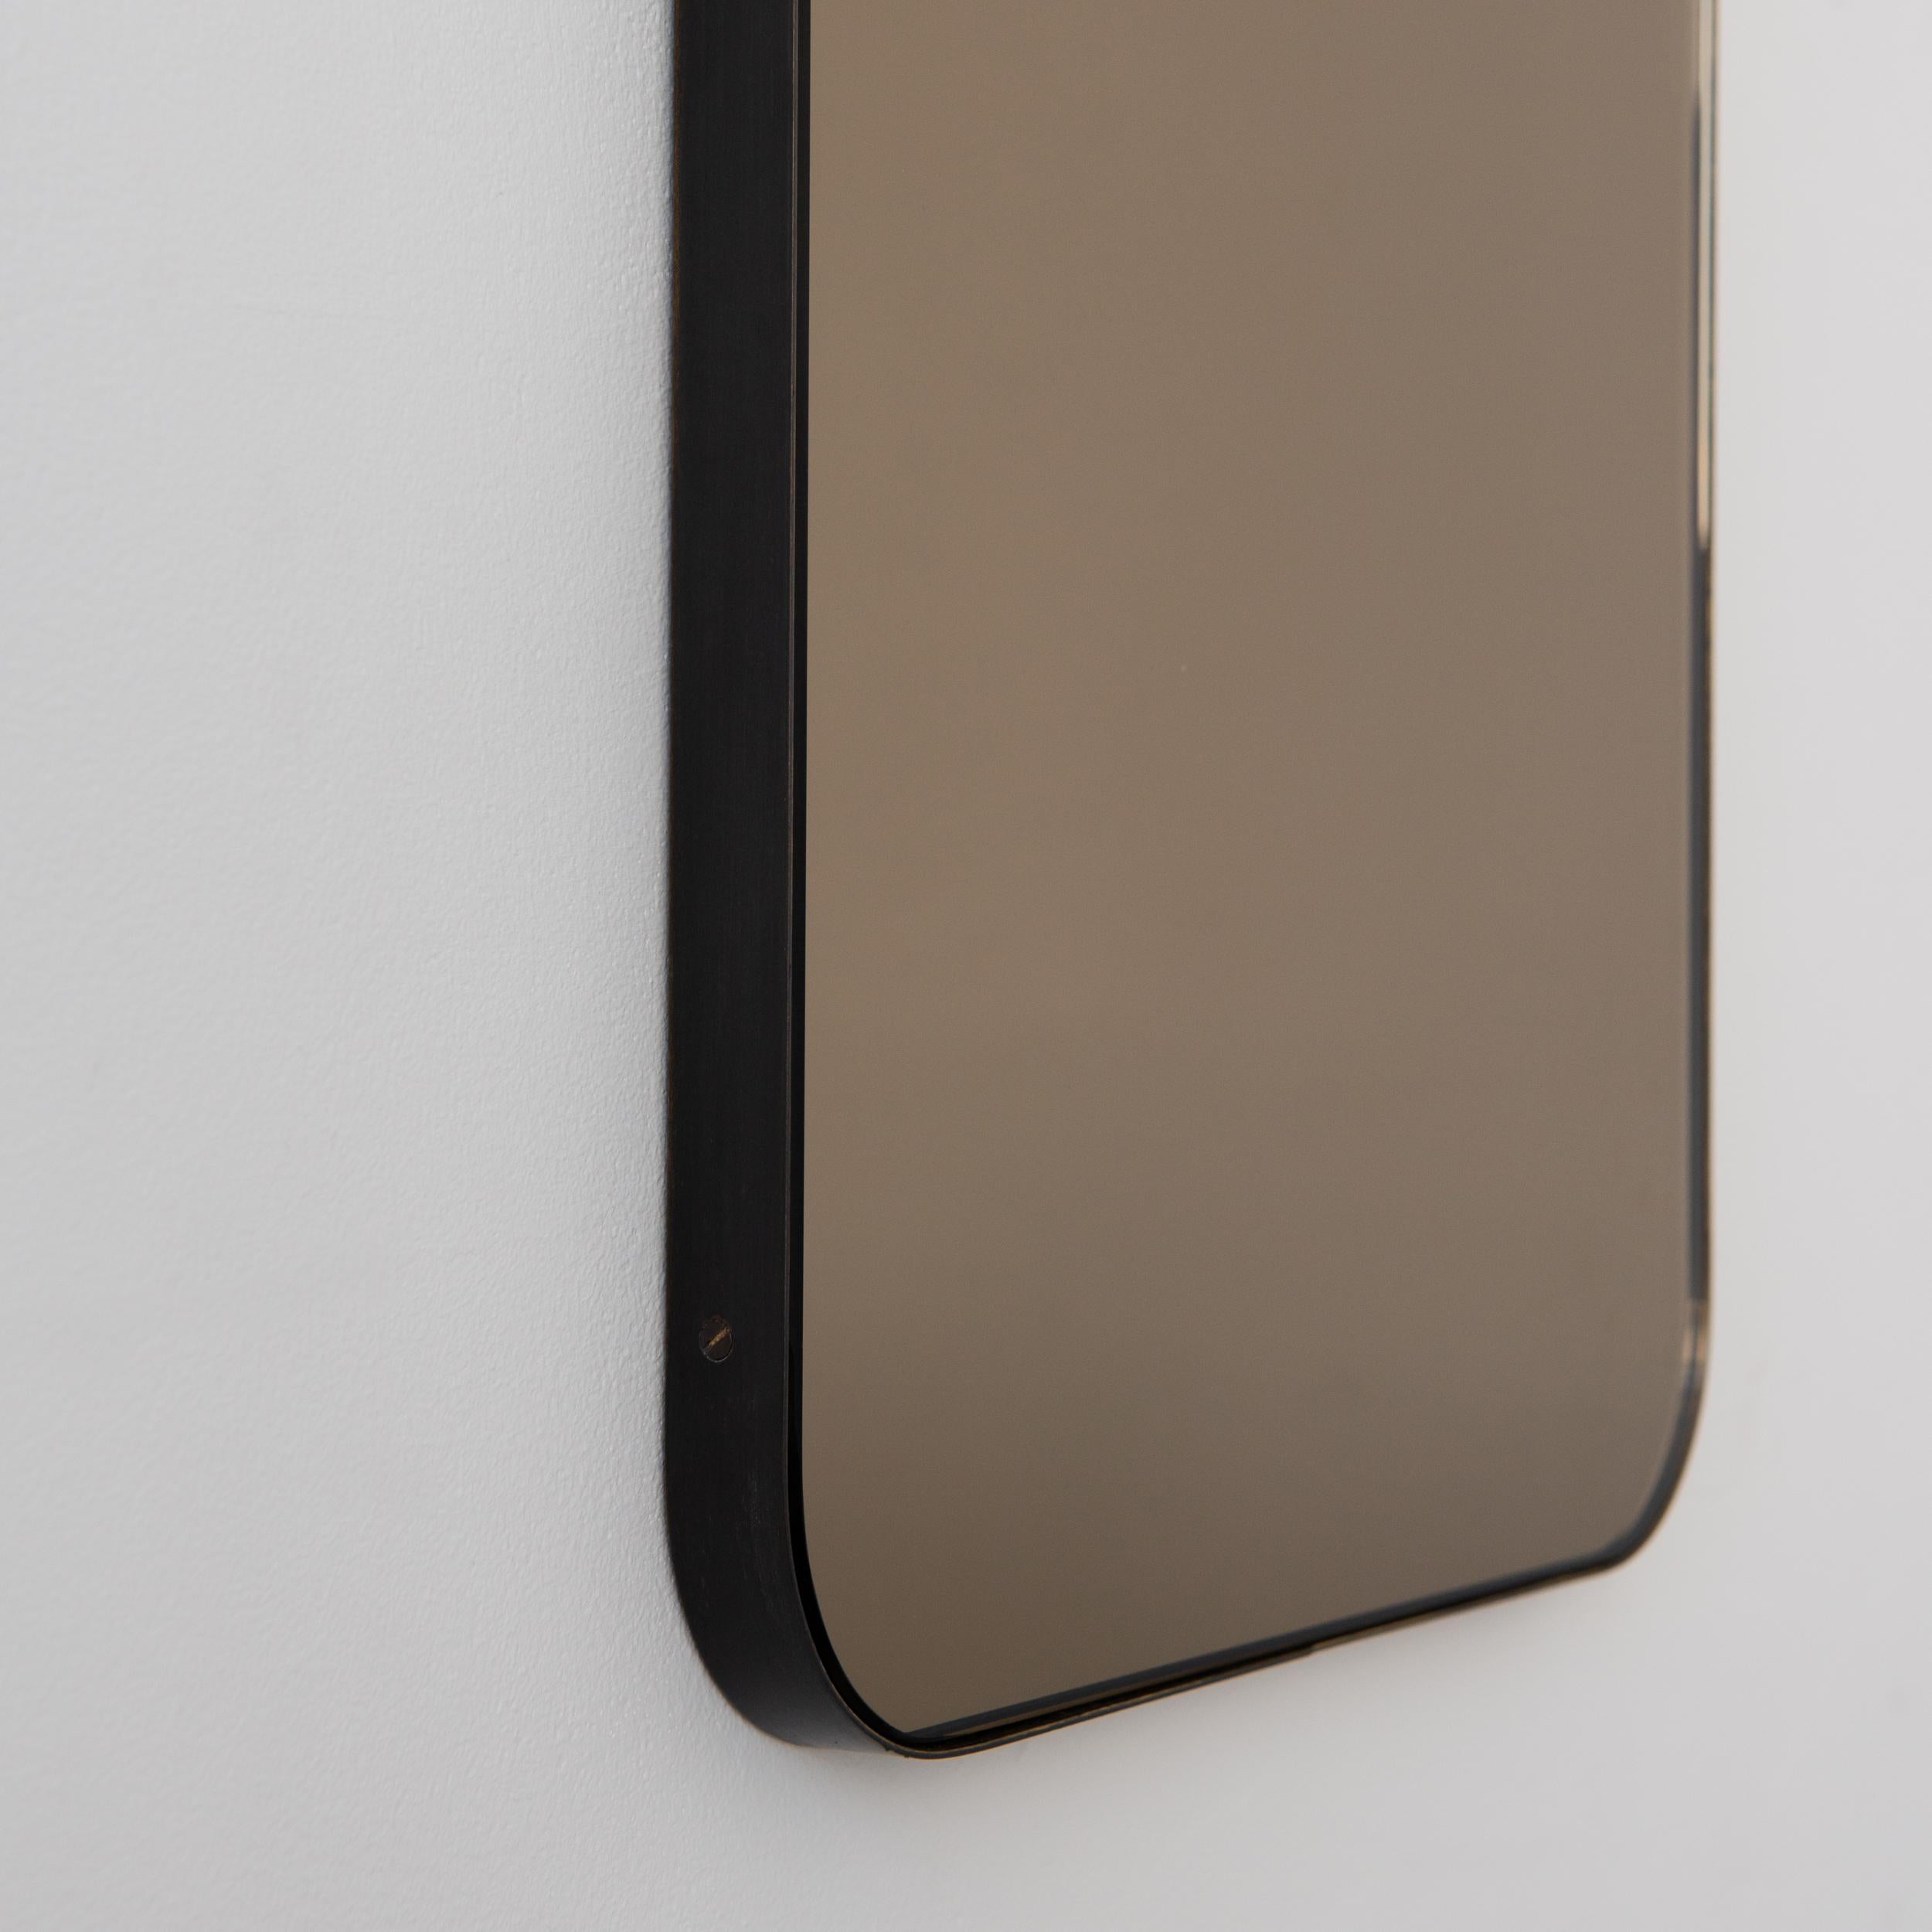 Modern rectangular mirror with an elegant solid bronze patina brass frame. Part of the charming Quadris collection, designed and handcrafted in London, UK. 

Medium, large and extra-large (37cm x 56cm, 46cm x 71cm and 48cm x 97cm) mirrors are fitted